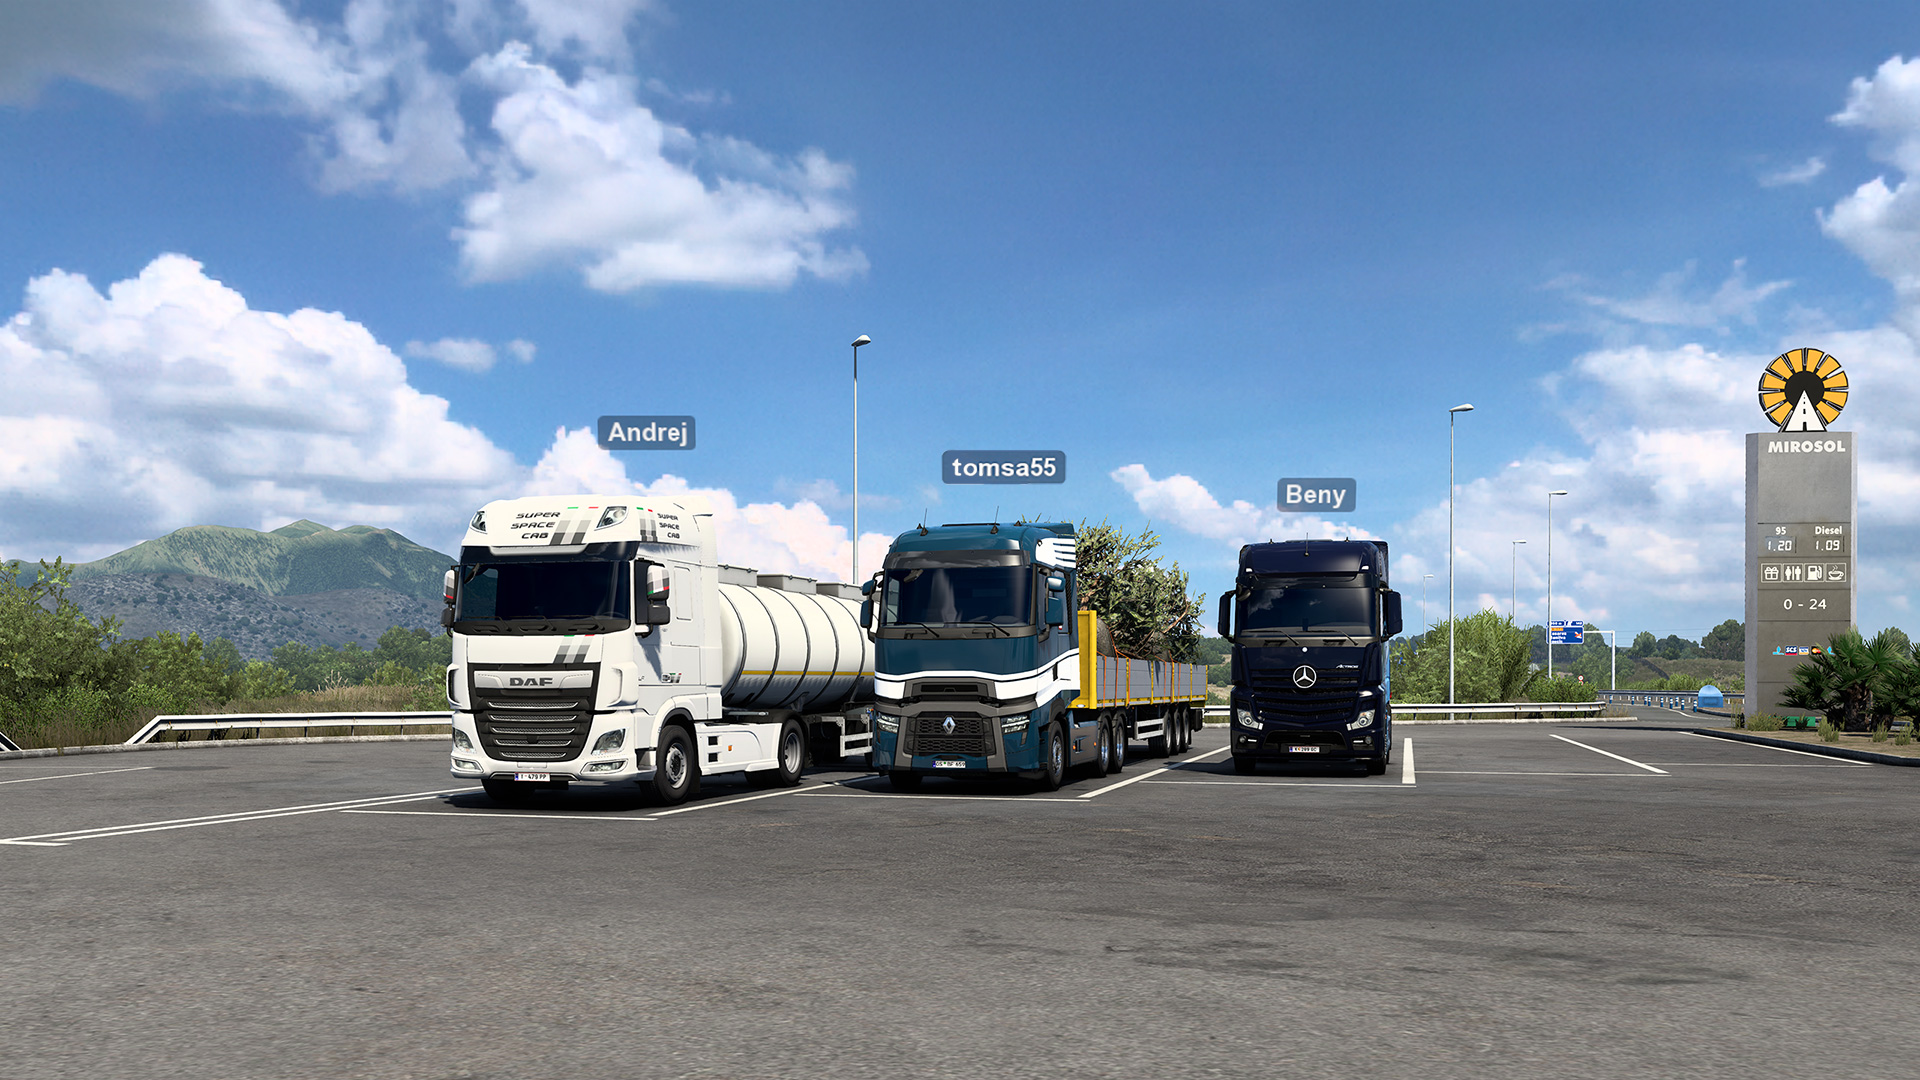 Euro Truck Simulator 2’s official multiplayer is live in the free 1.41 update